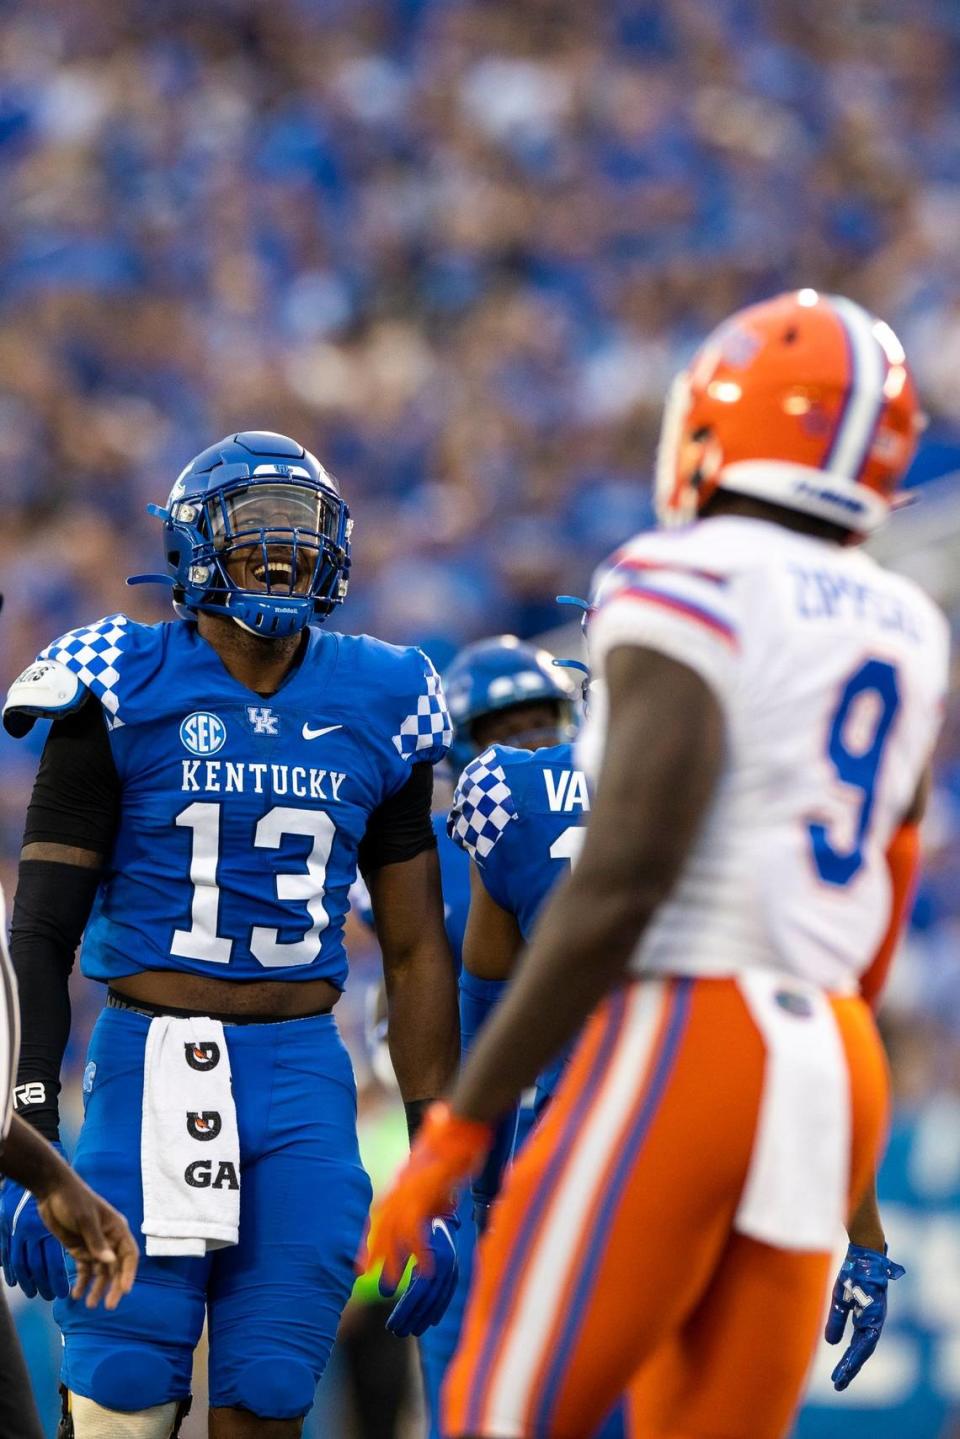 In three career games against Florida, Kentucky linebacker J.J. Weaver has totaled 17 tackles, one-half tackle for loss and one interception.